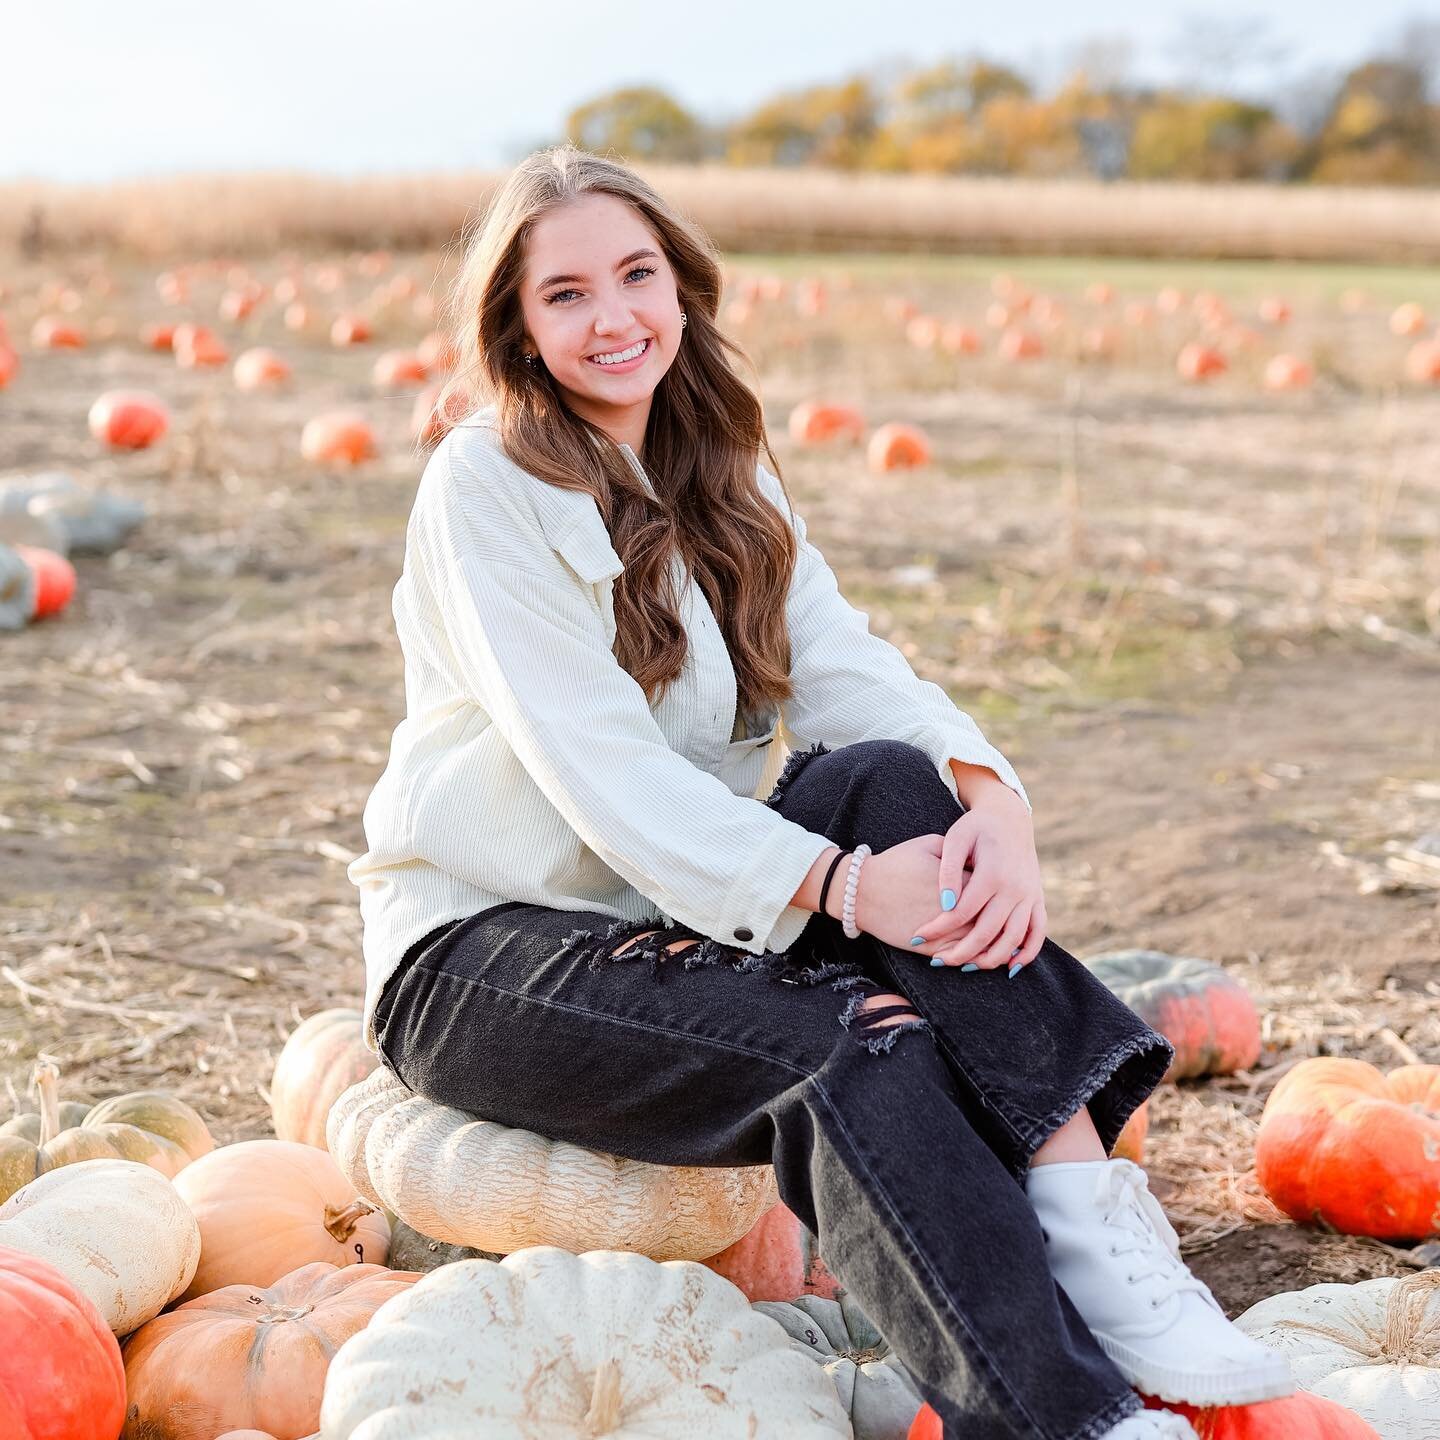 Don&rsquo;t mind me, just cramming in the last little bit of the Fall season into my feed. I will be eating all things pumpkin while working on my next big Senior project this week. Can&rsquo;t wait to share the details! 🤩

Shoutout to @jordan.schwe